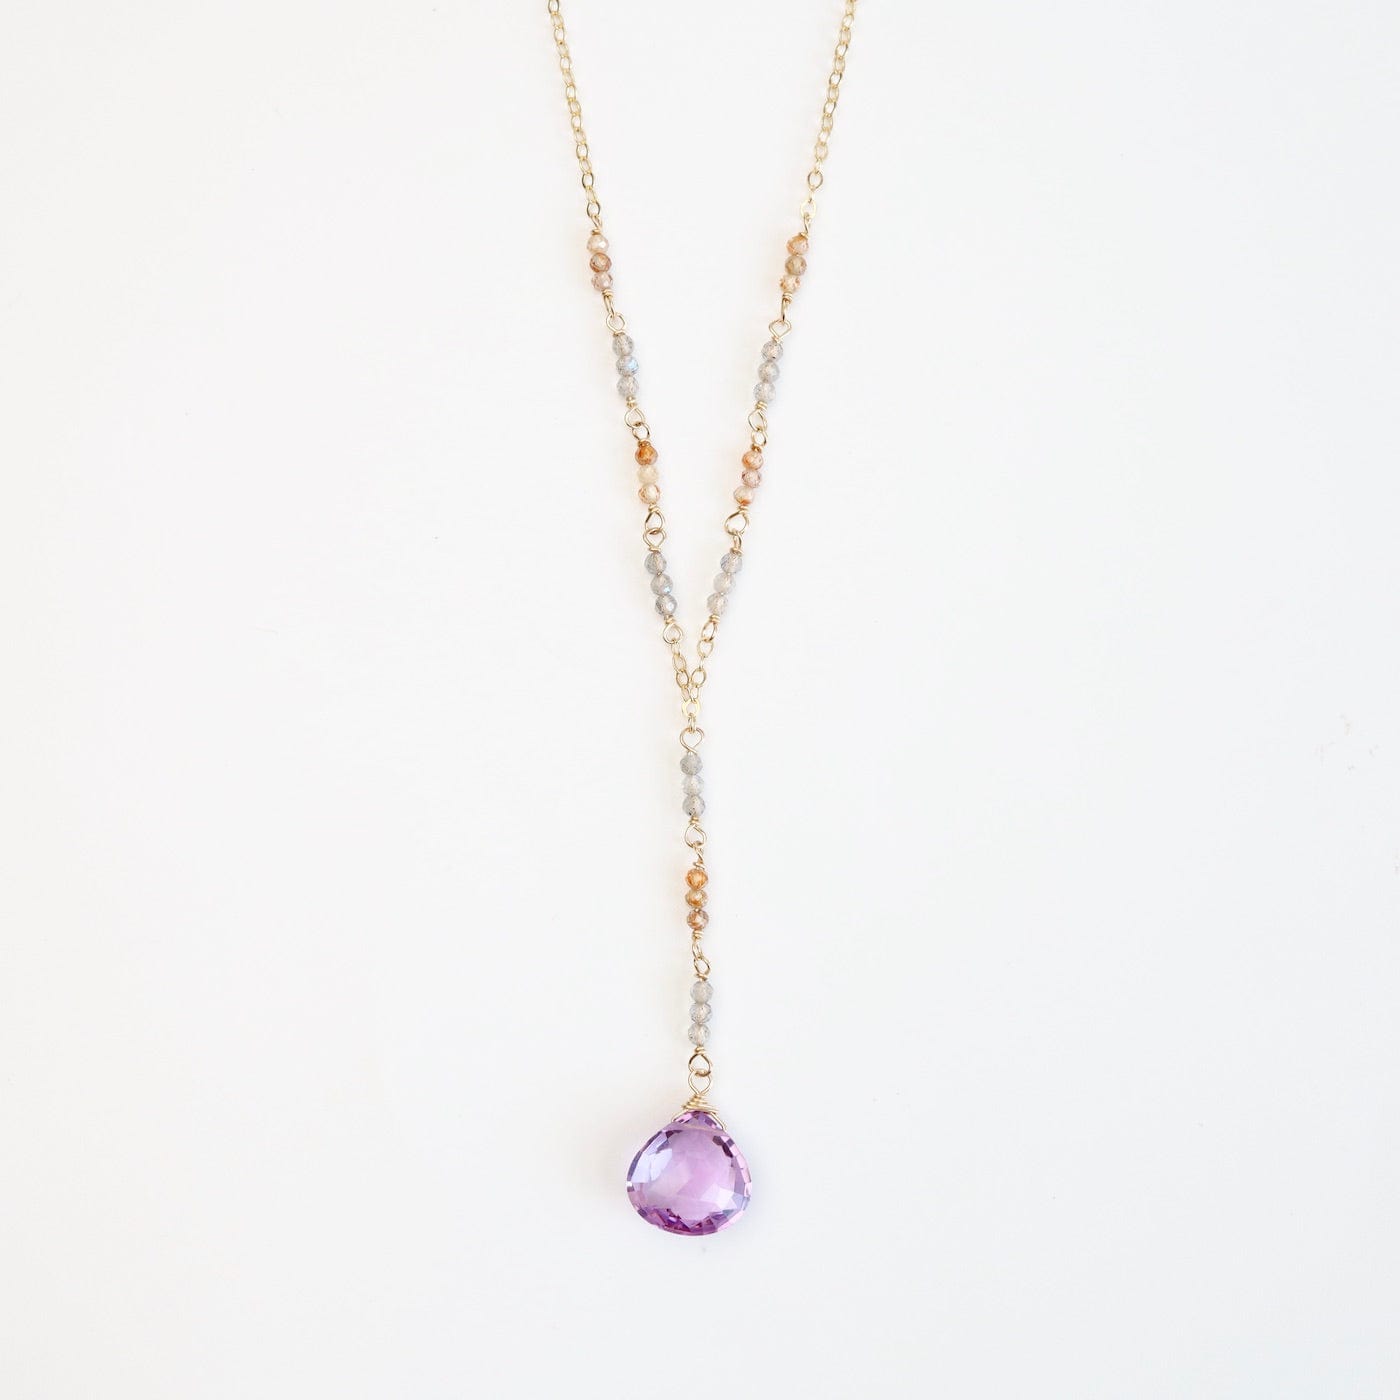 NKL-GF Gold Filled Long "Y" drop Necklace with Pink Amethyst